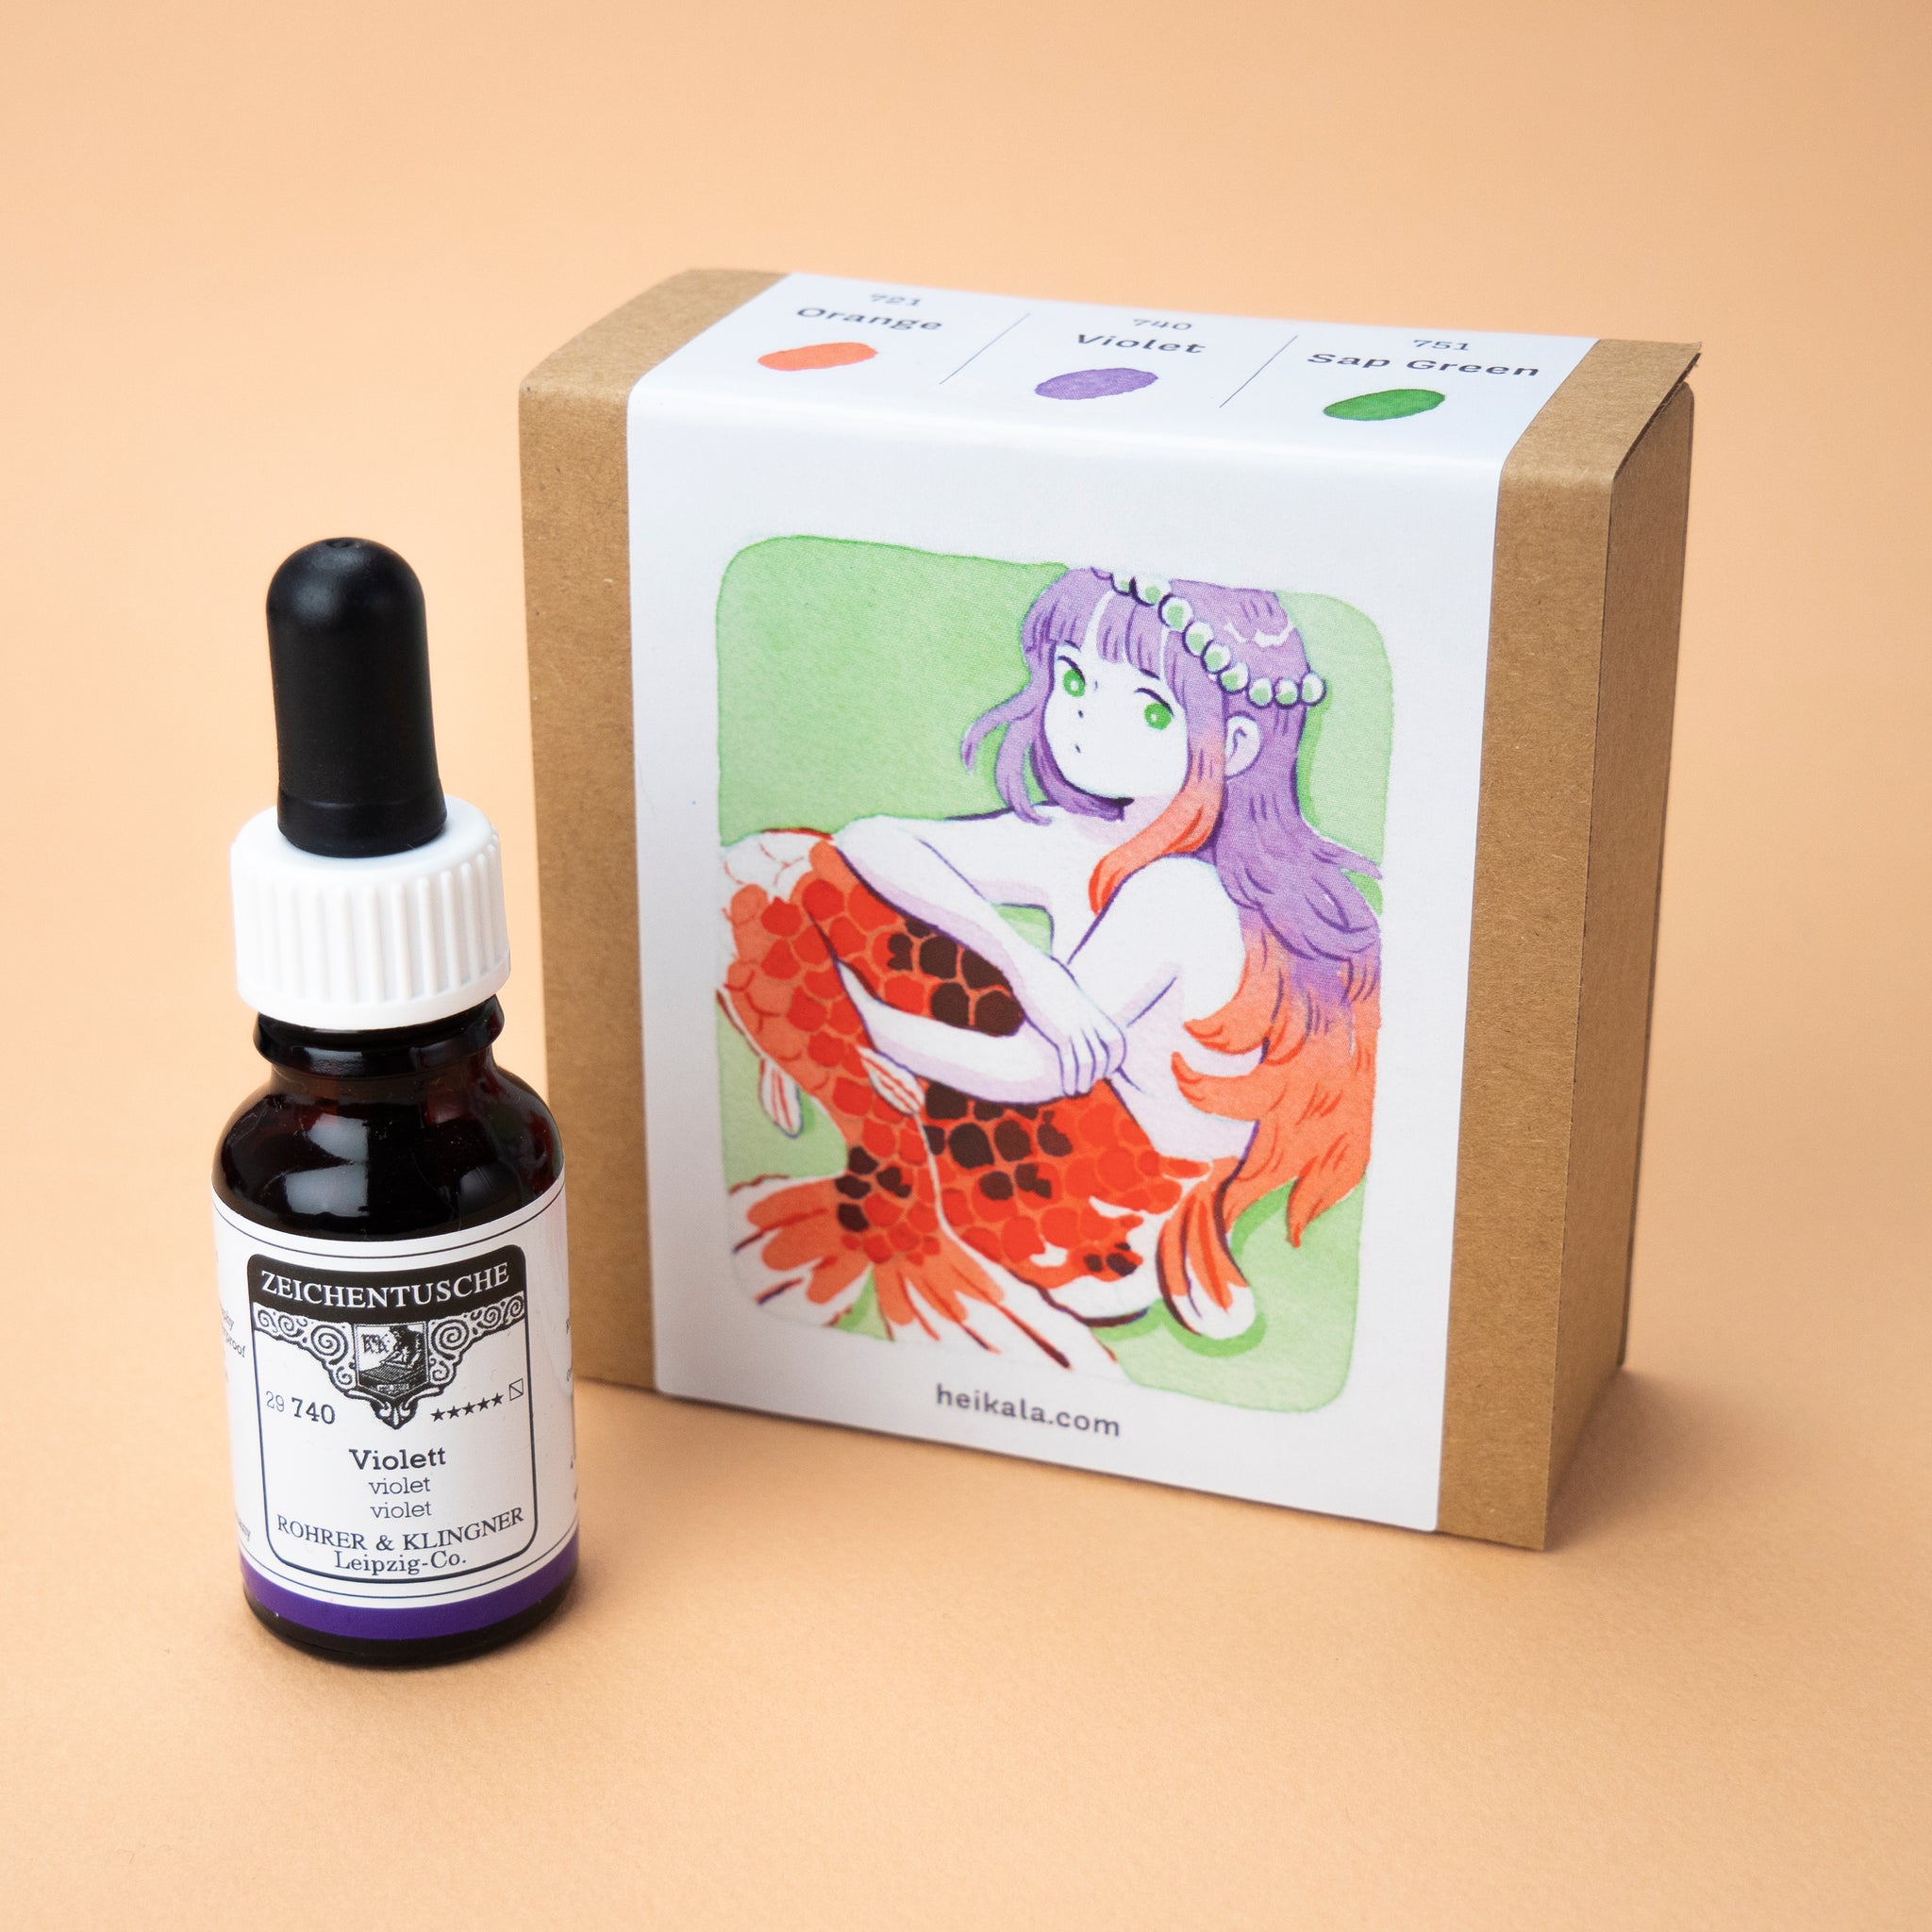 A photo of the Complementary Colors ink set in its box, with a single bottle of the color violet next to it. The label on the box is a painting of a koi mermaid with purple and red hair and a string of pearls on her head.